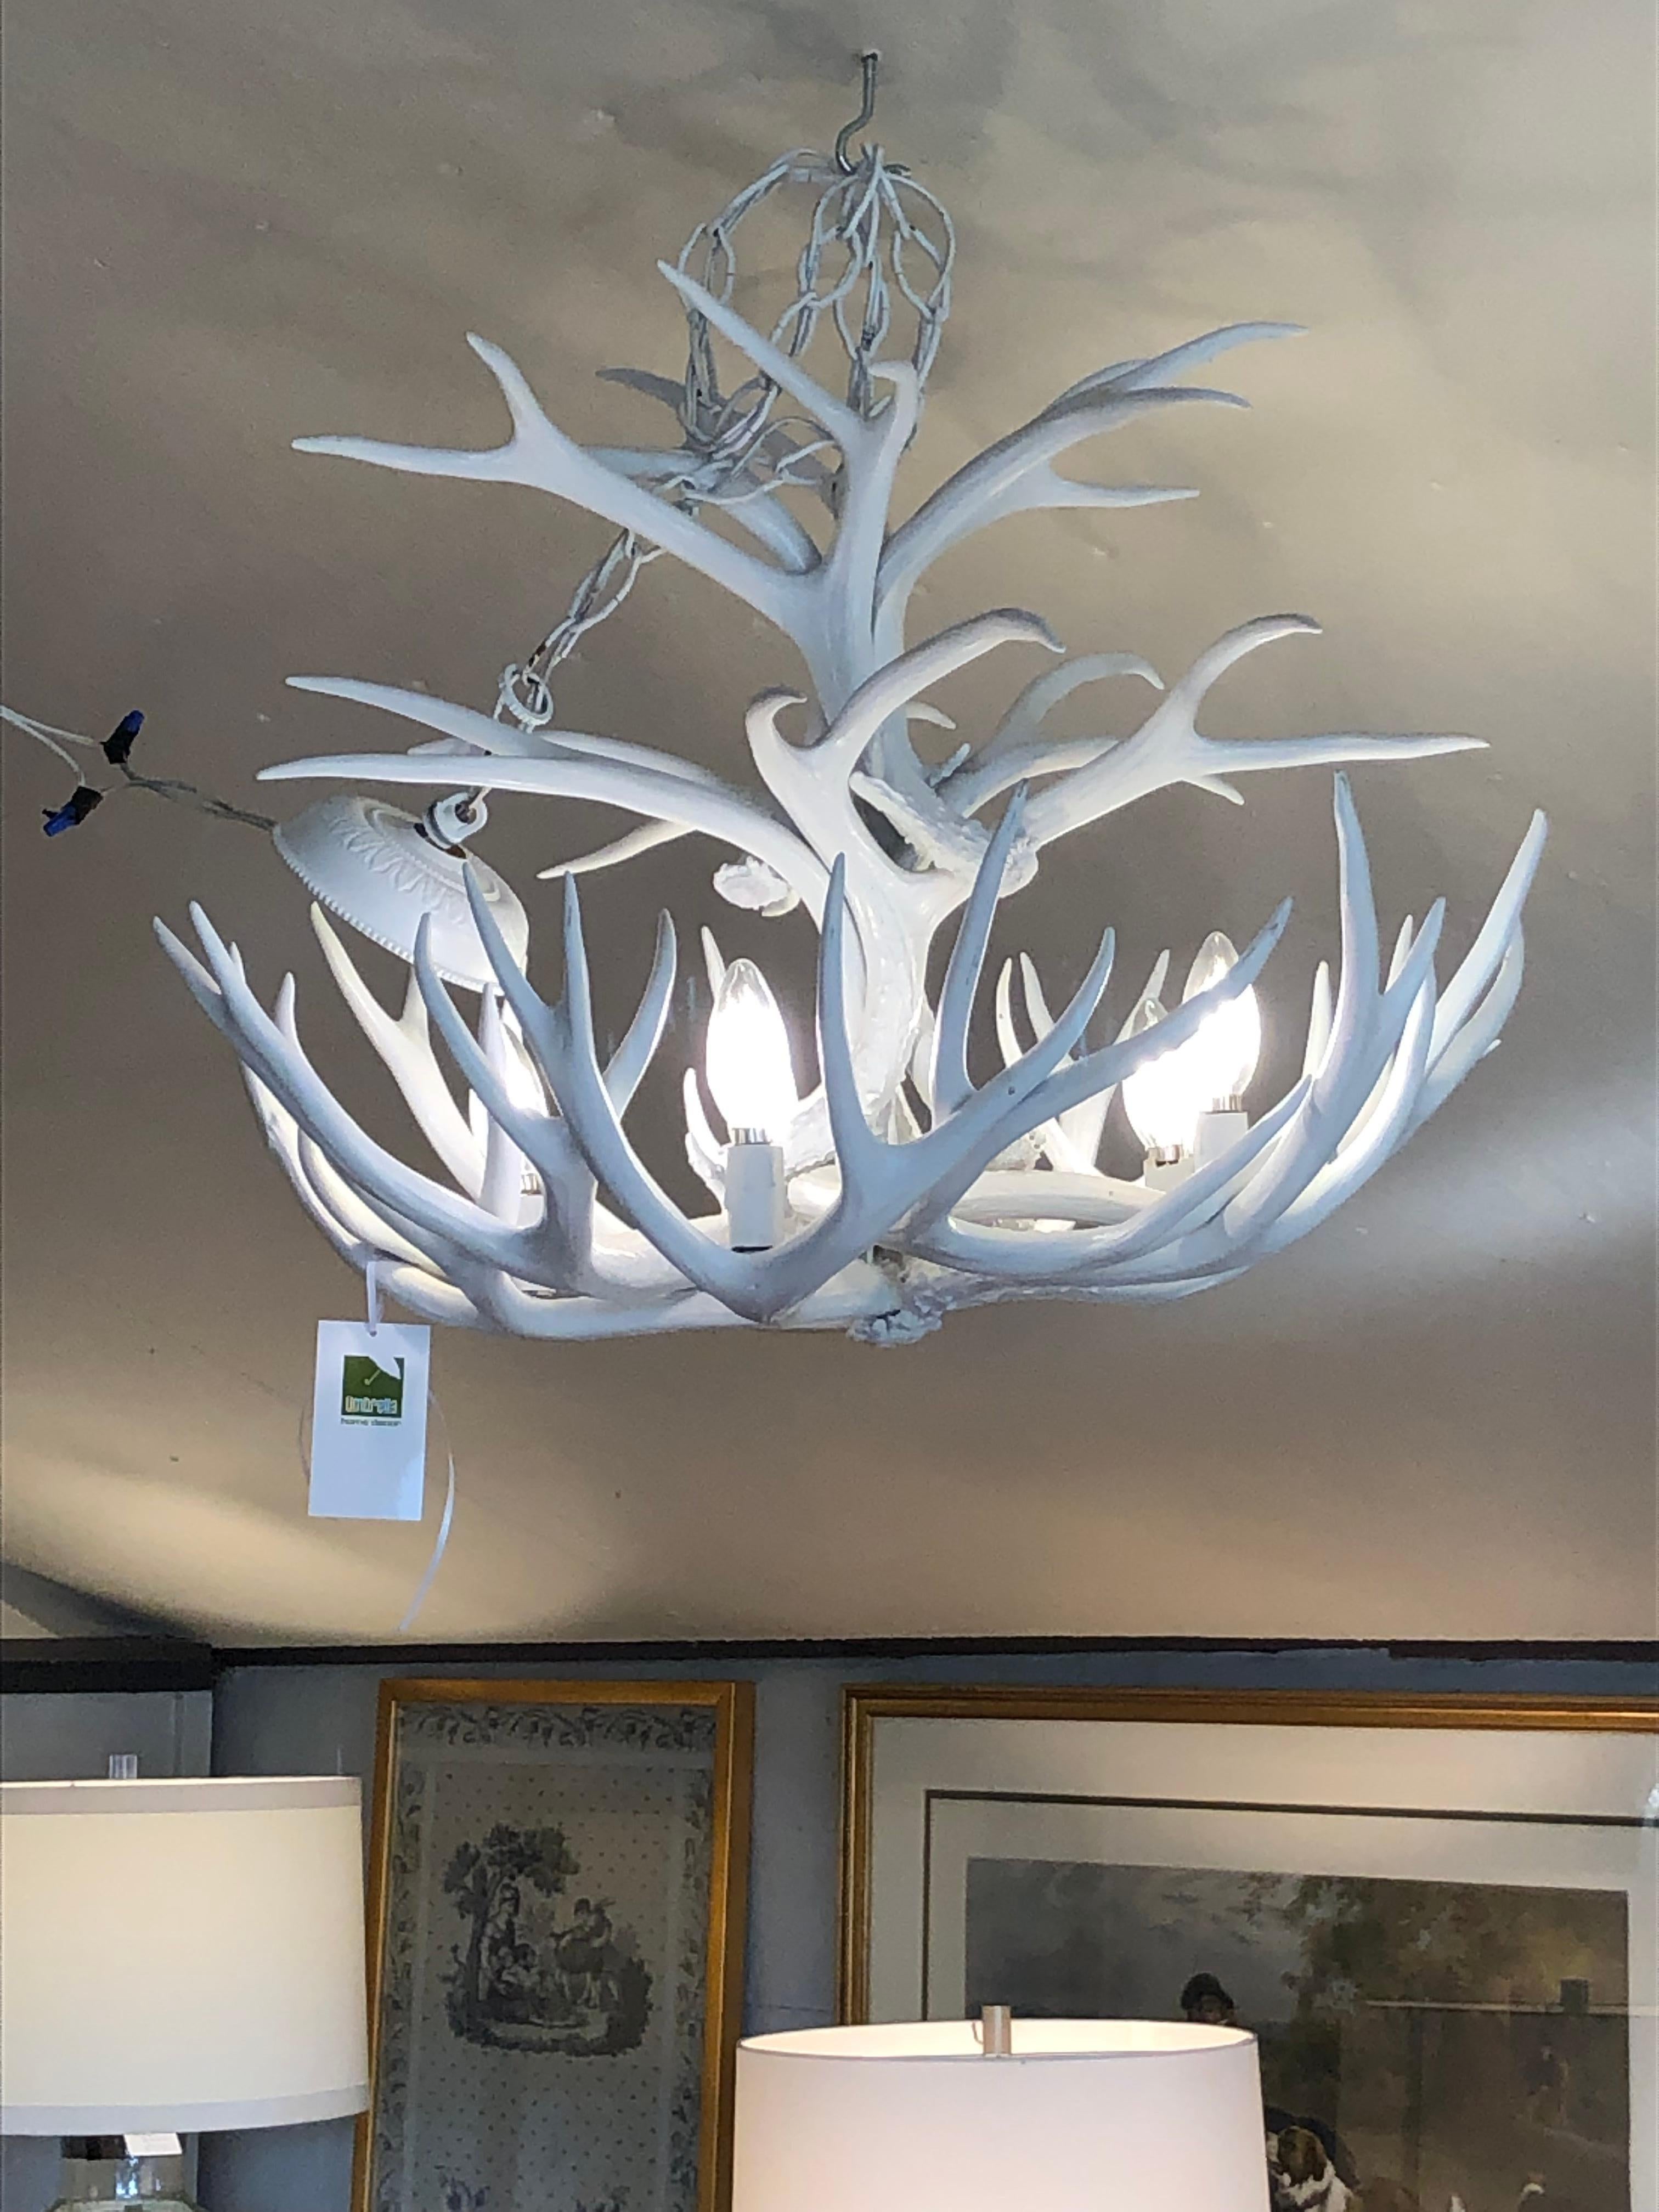 Striking nice sized antler chandelier painted white to give it a contemporary organic feel.  Brass canopy painted white is included.

Mara